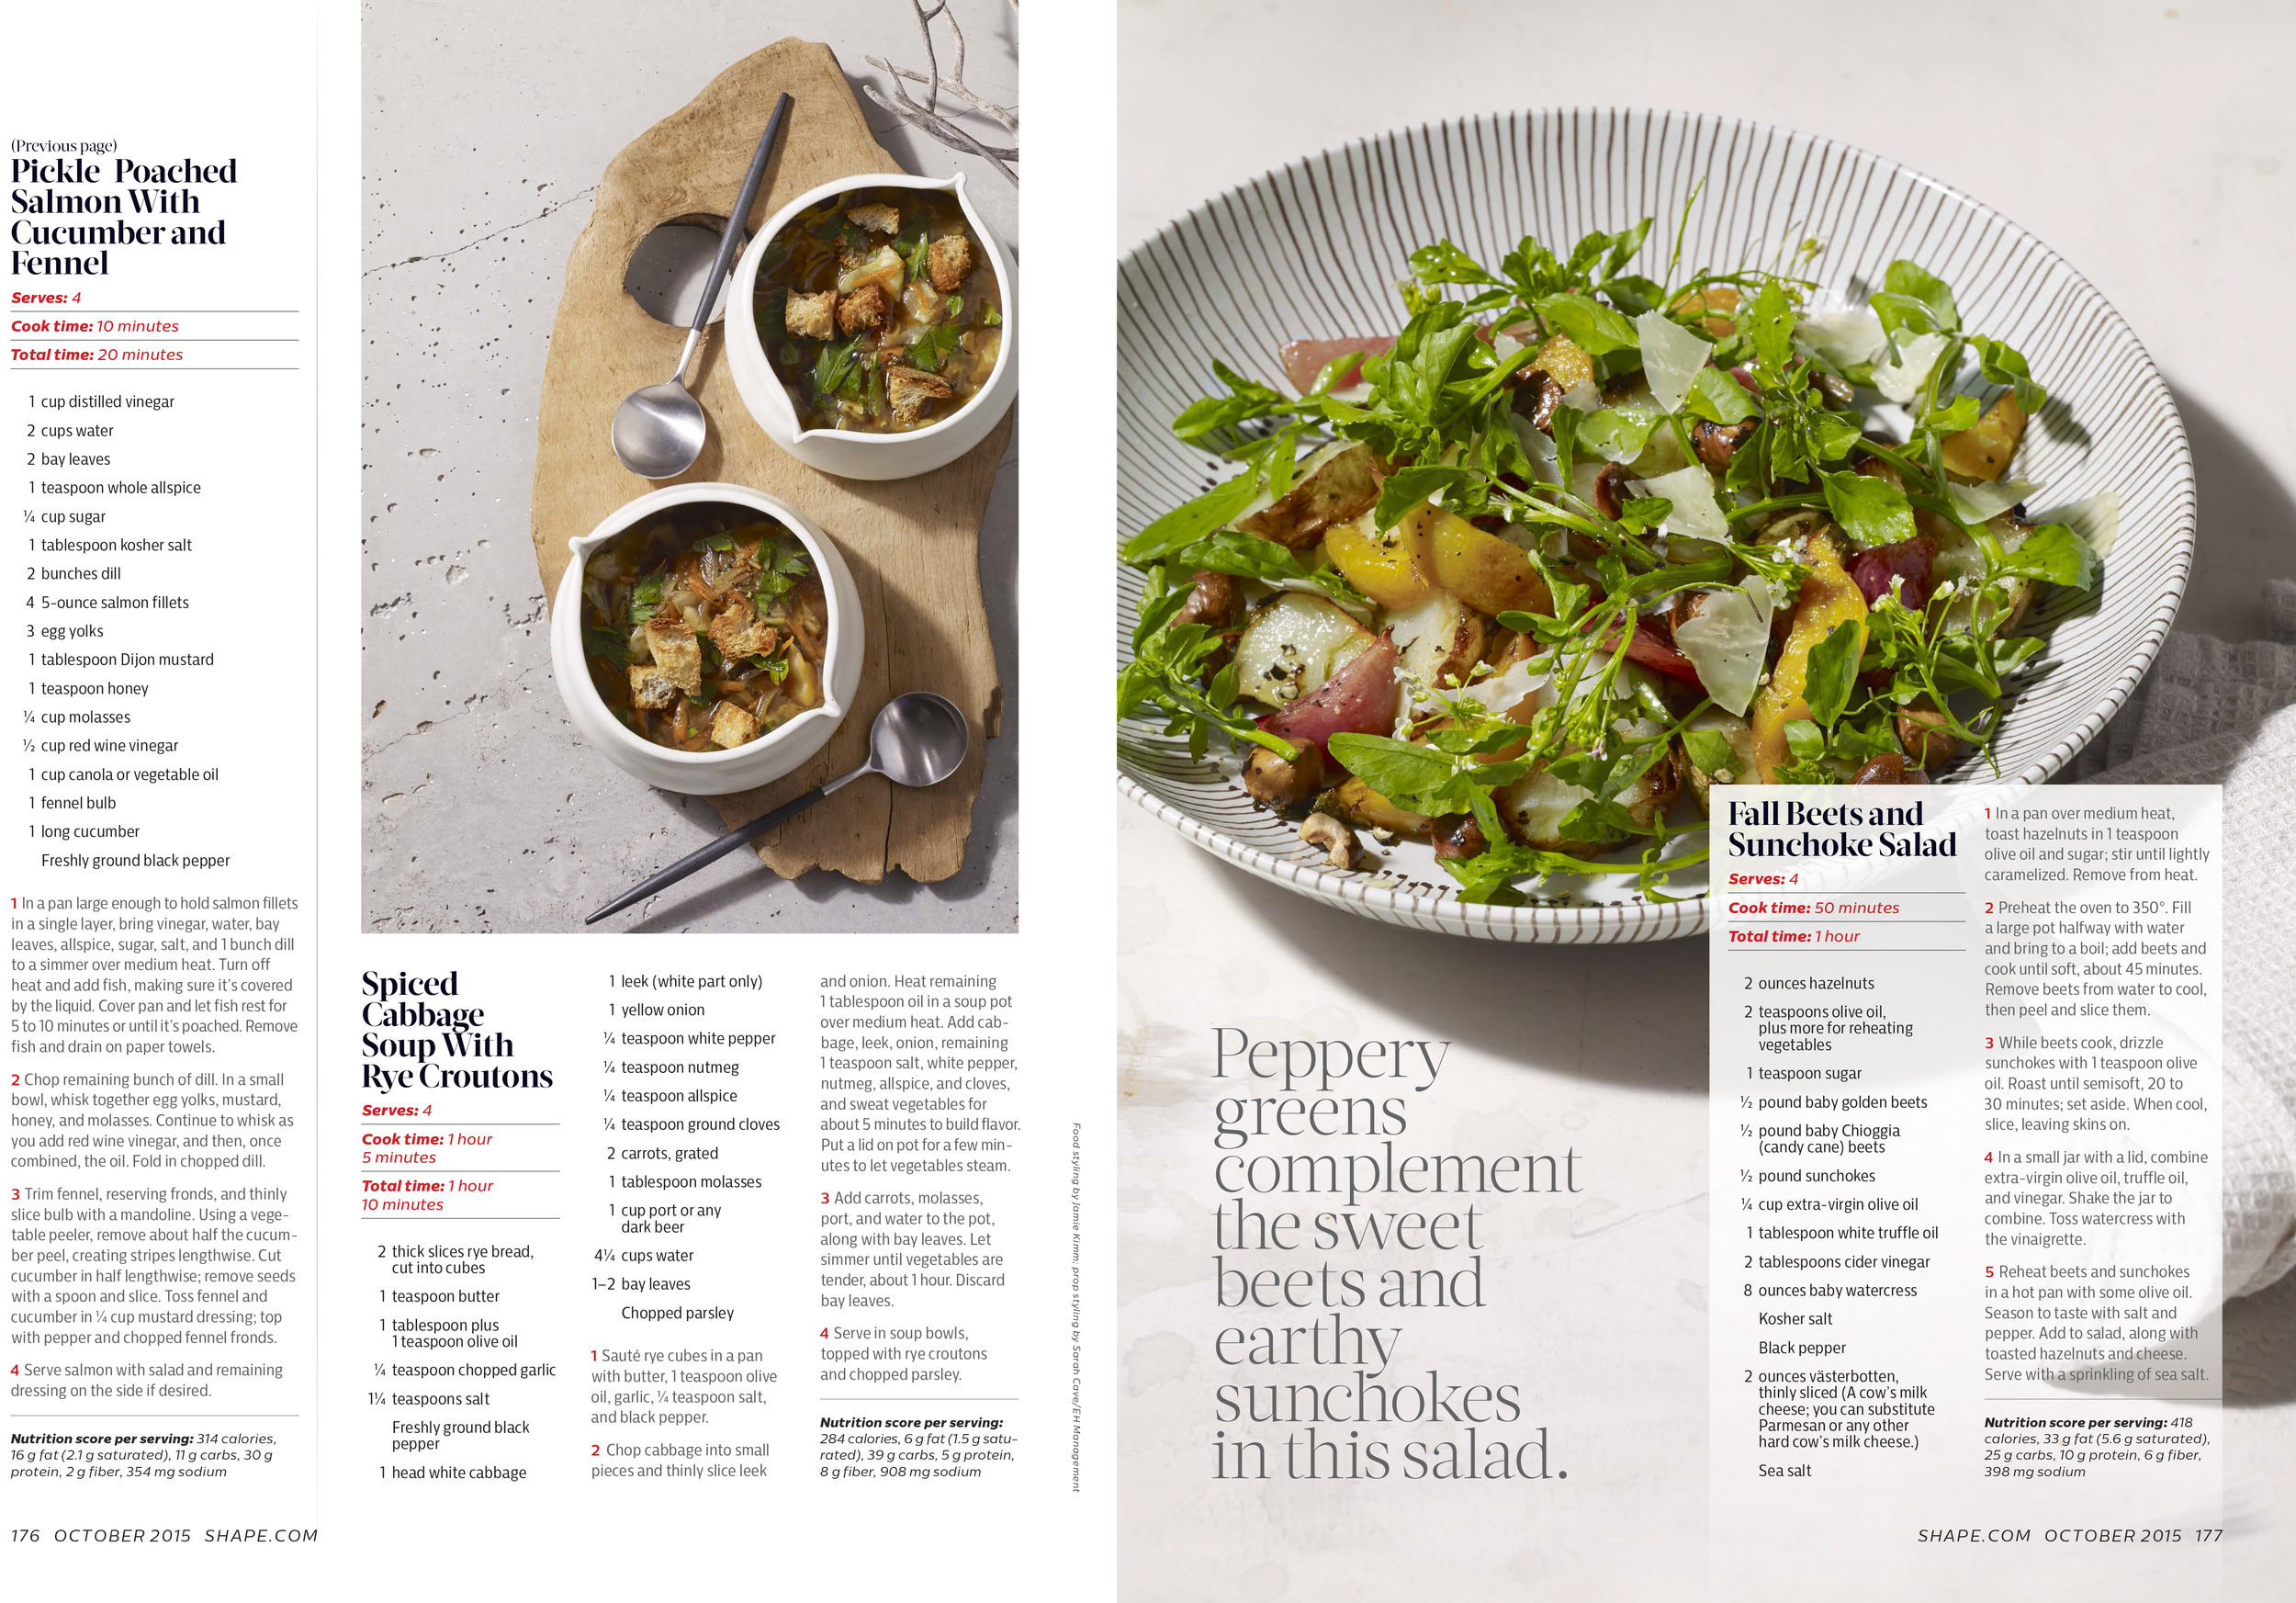 The Fresh Way Of Eating, October 2015